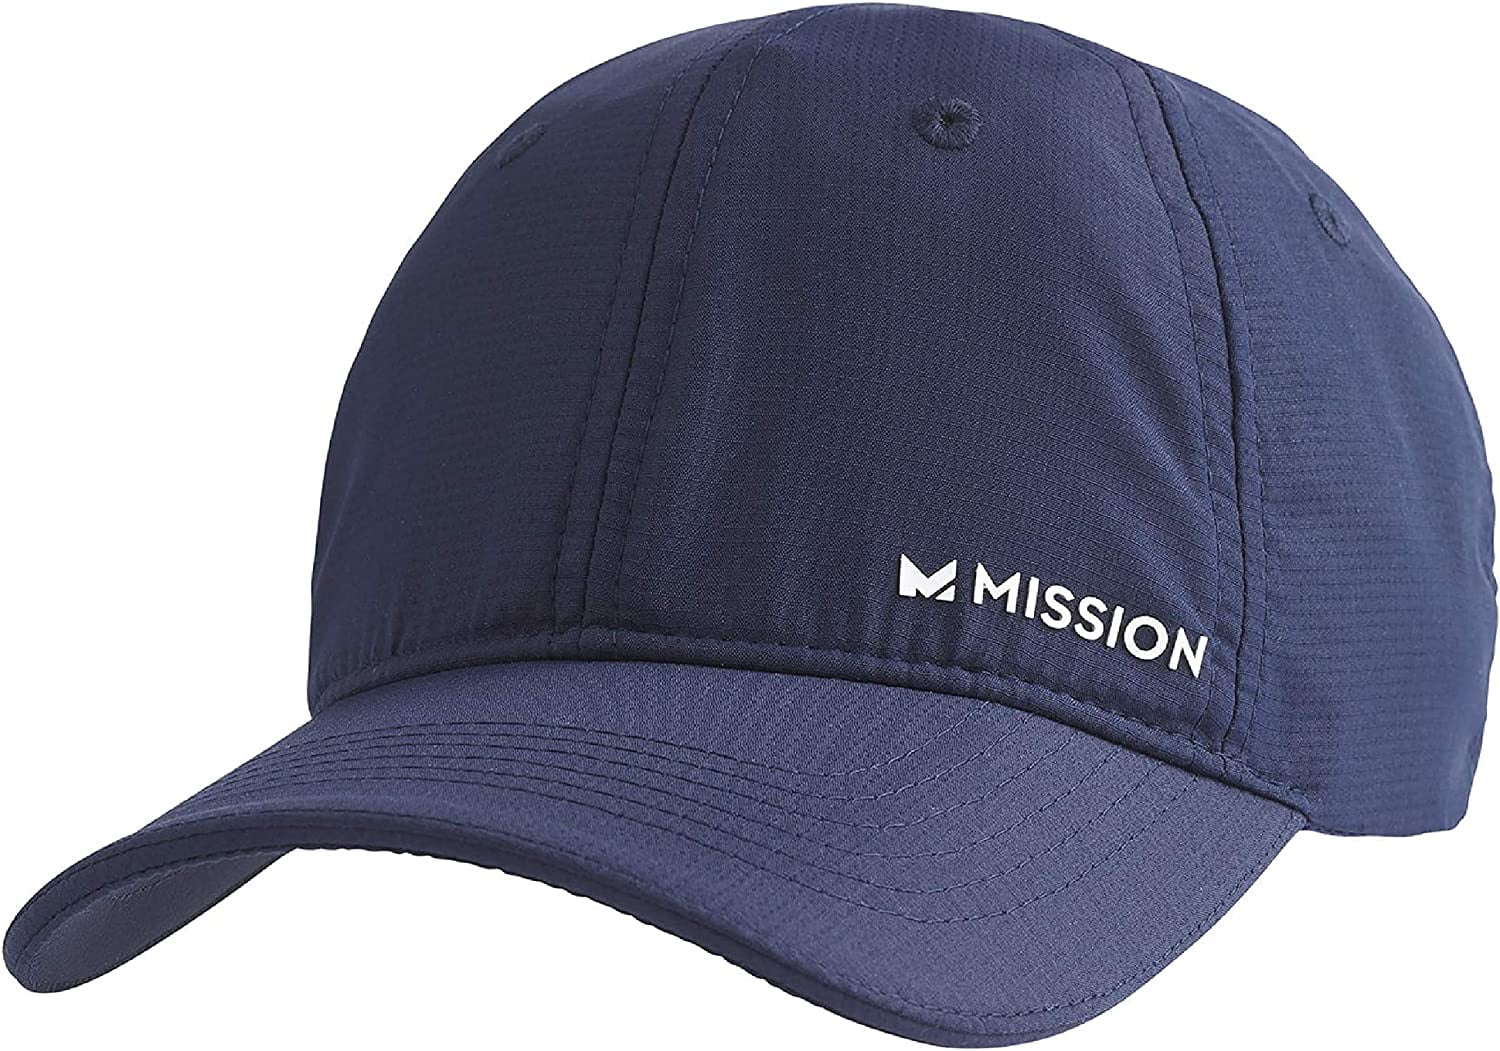 Hydro Active Cooling Hat - Blue & Whitem, One Size -  Mission, MI7136